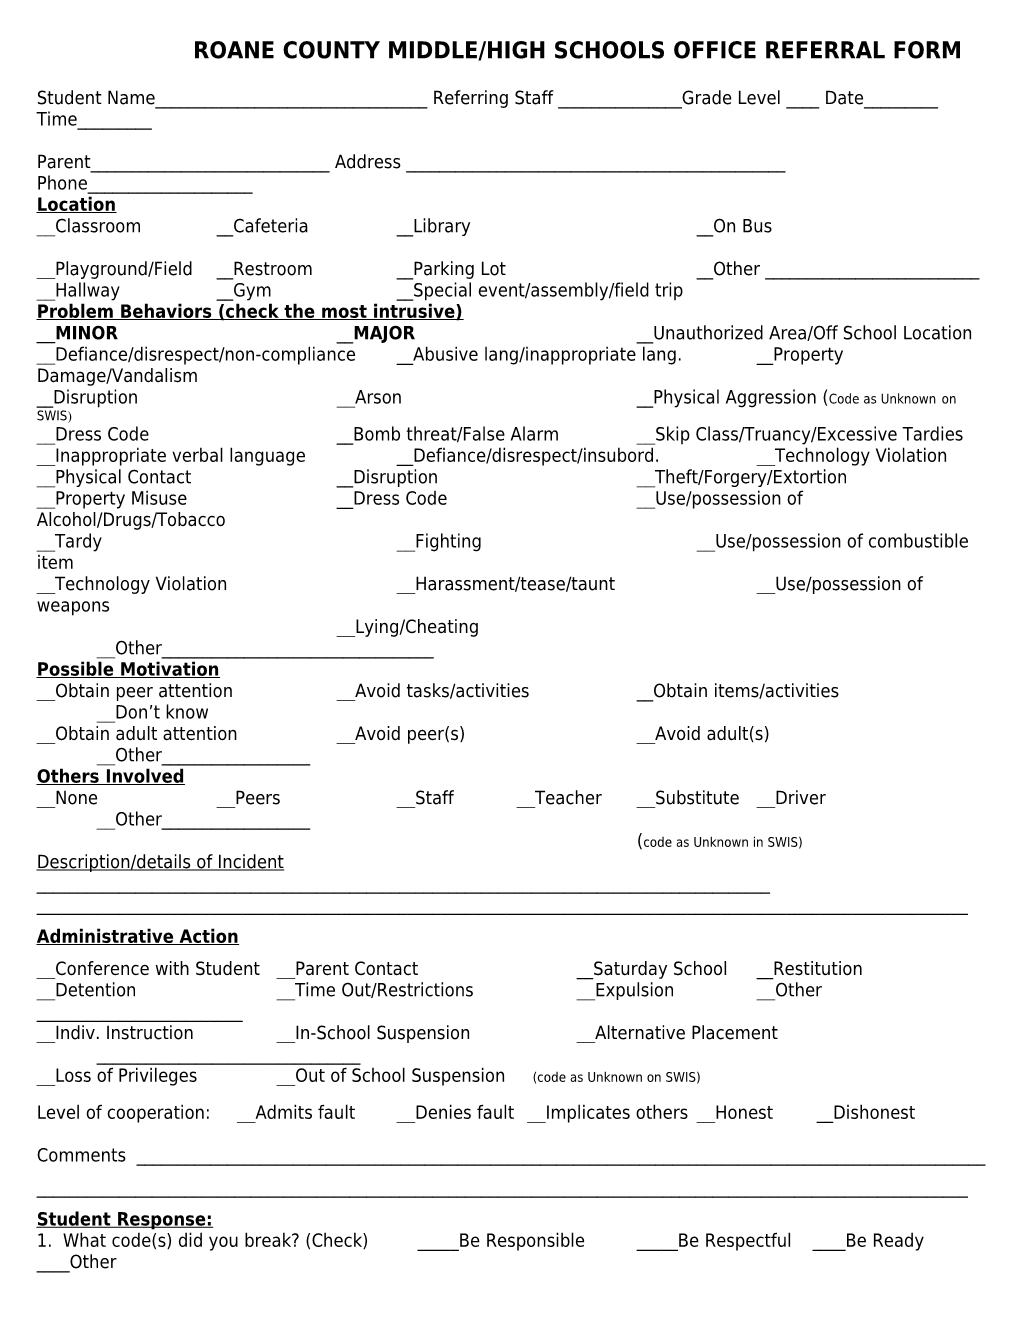 Roane County Schools Office Referral Form